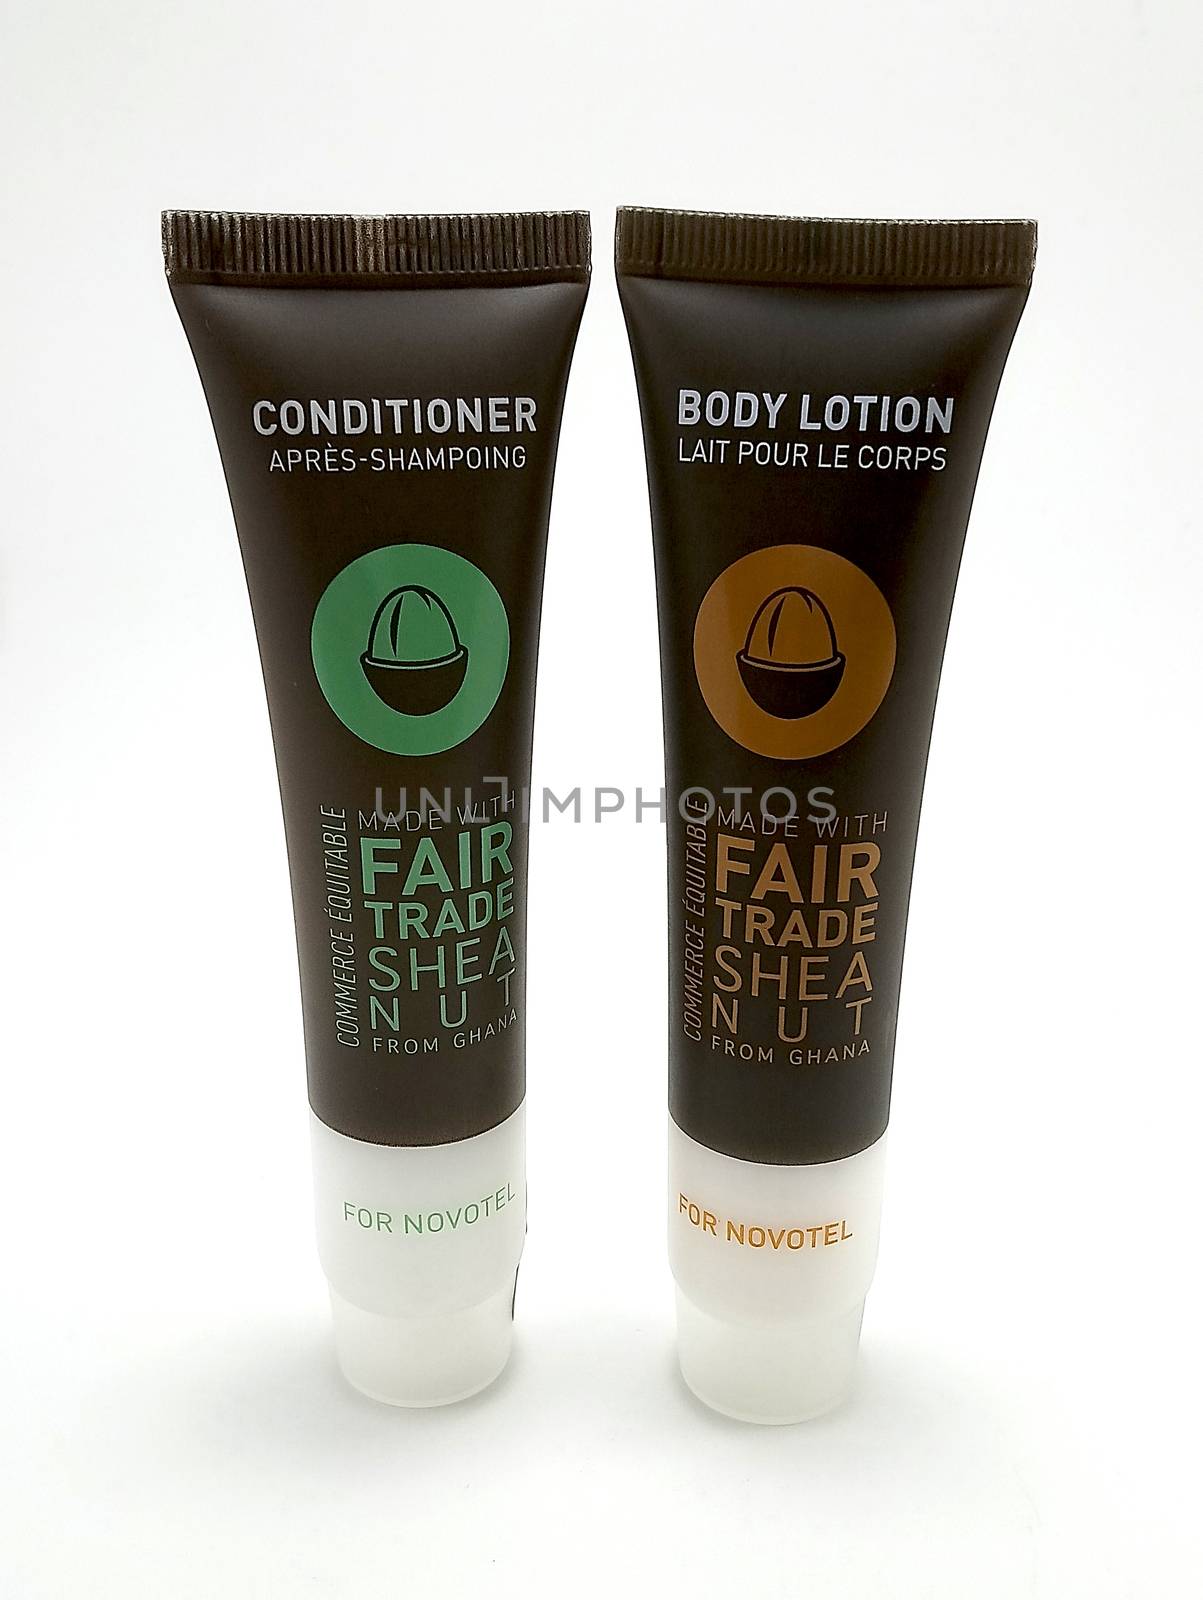 Novotel body lotion and conditioner tubes in Manila, Philippines by imwaltersy